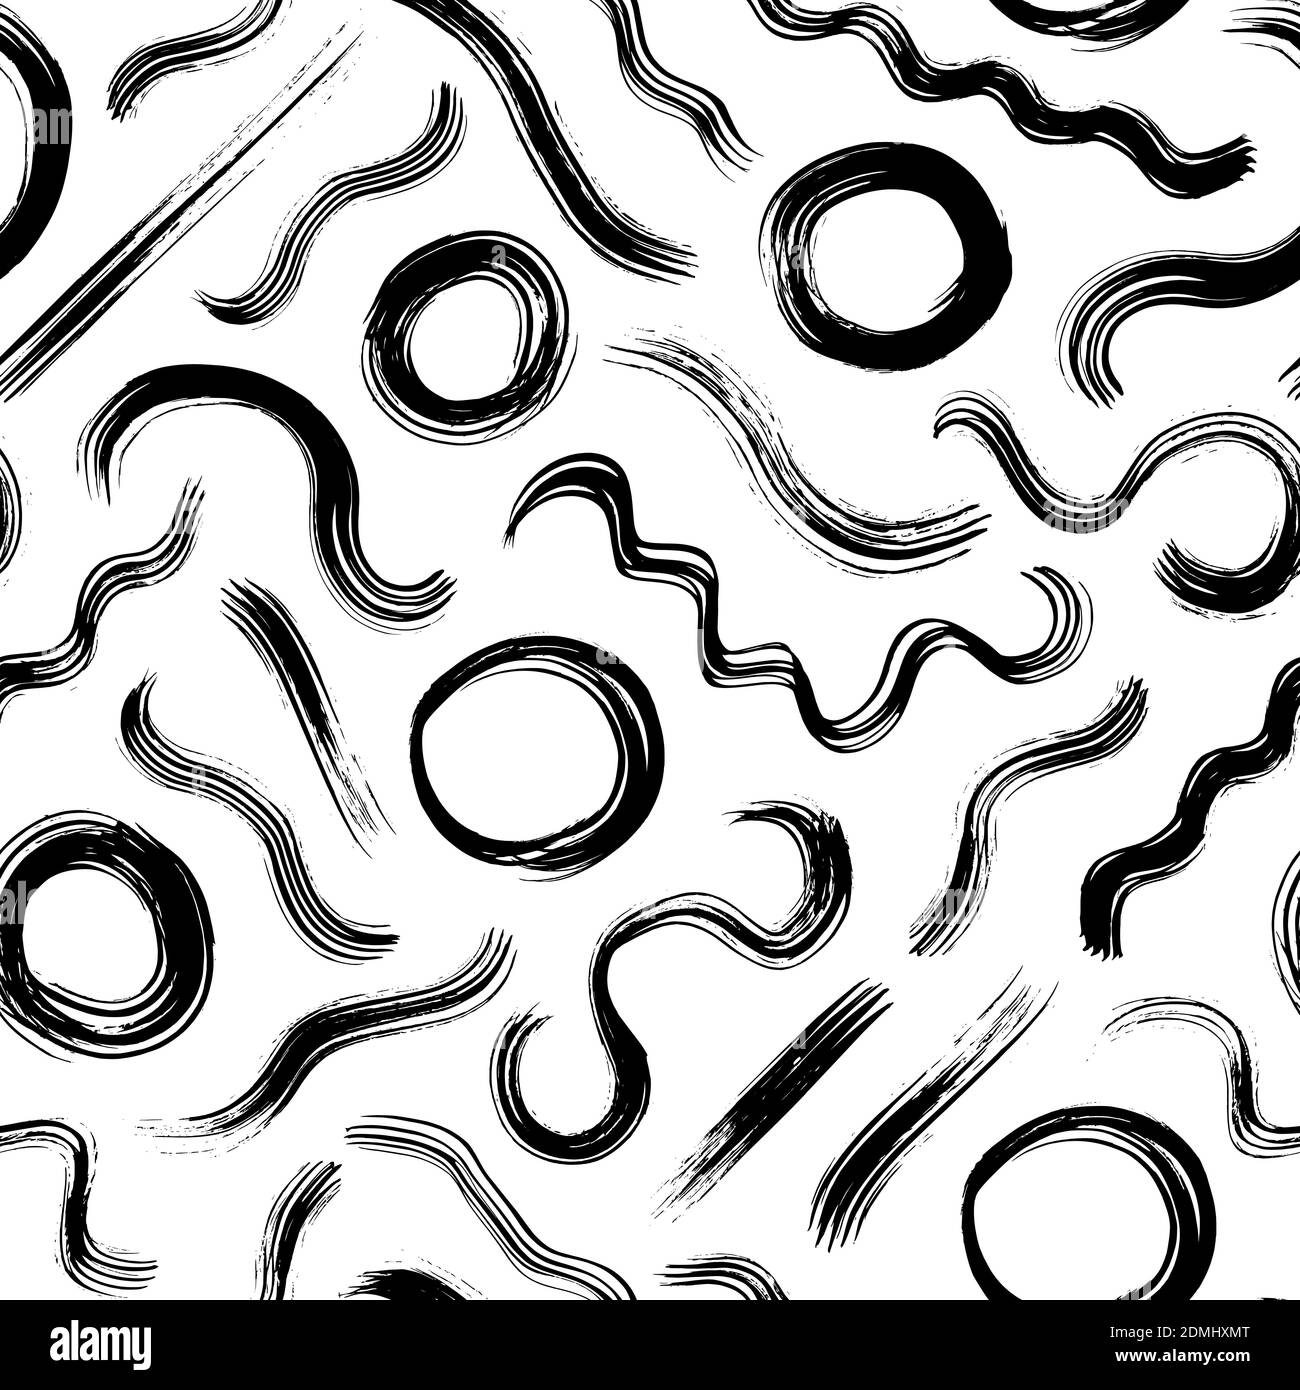 Seamless pattern with wavy lines and circles Stock Vector